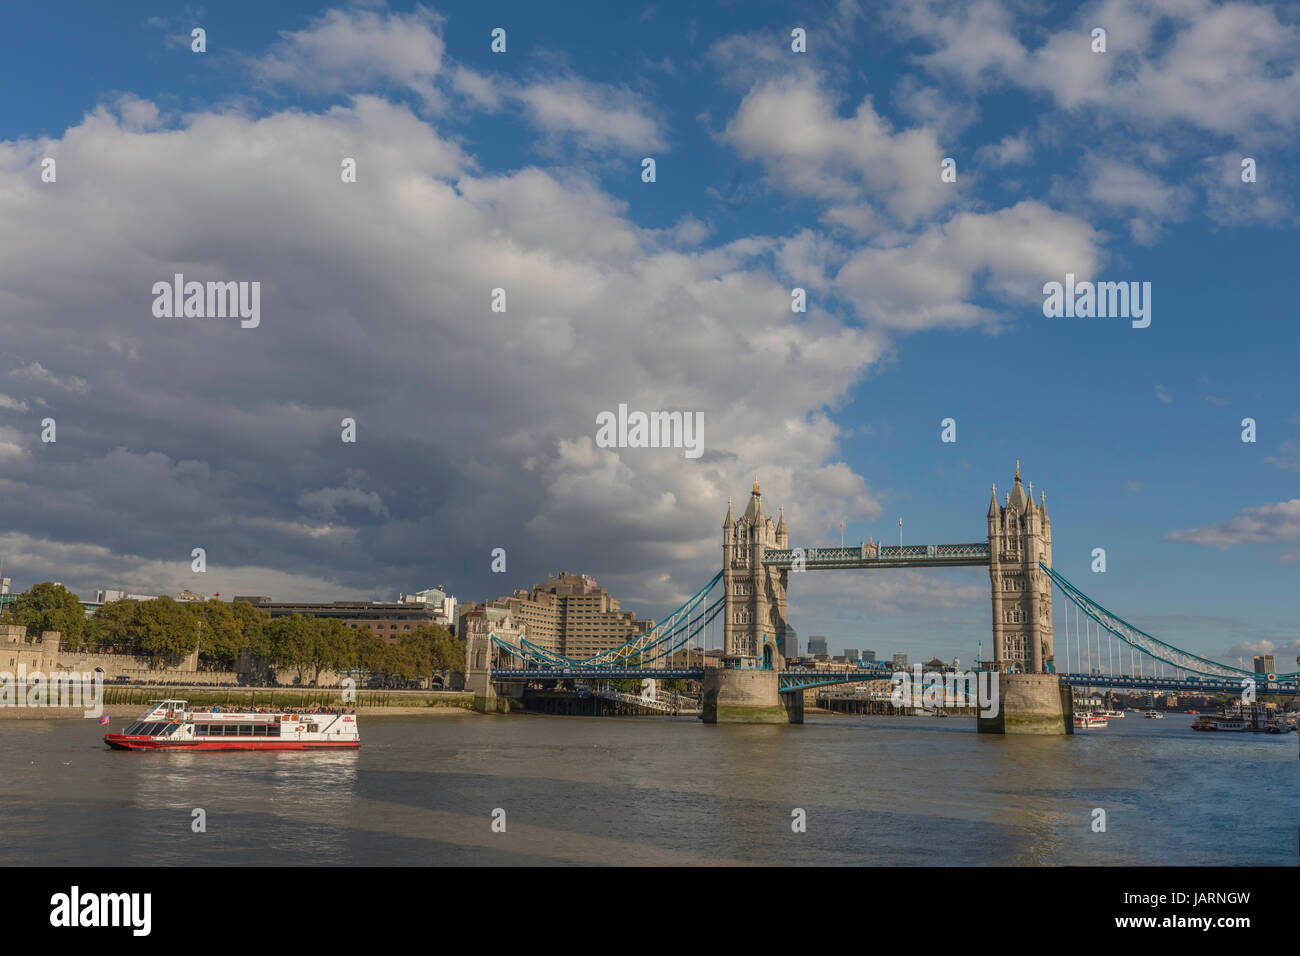 London, UK-April 13, 2017: Tower Bridge in London, famous and iconic tourist attraction. Stock Photo